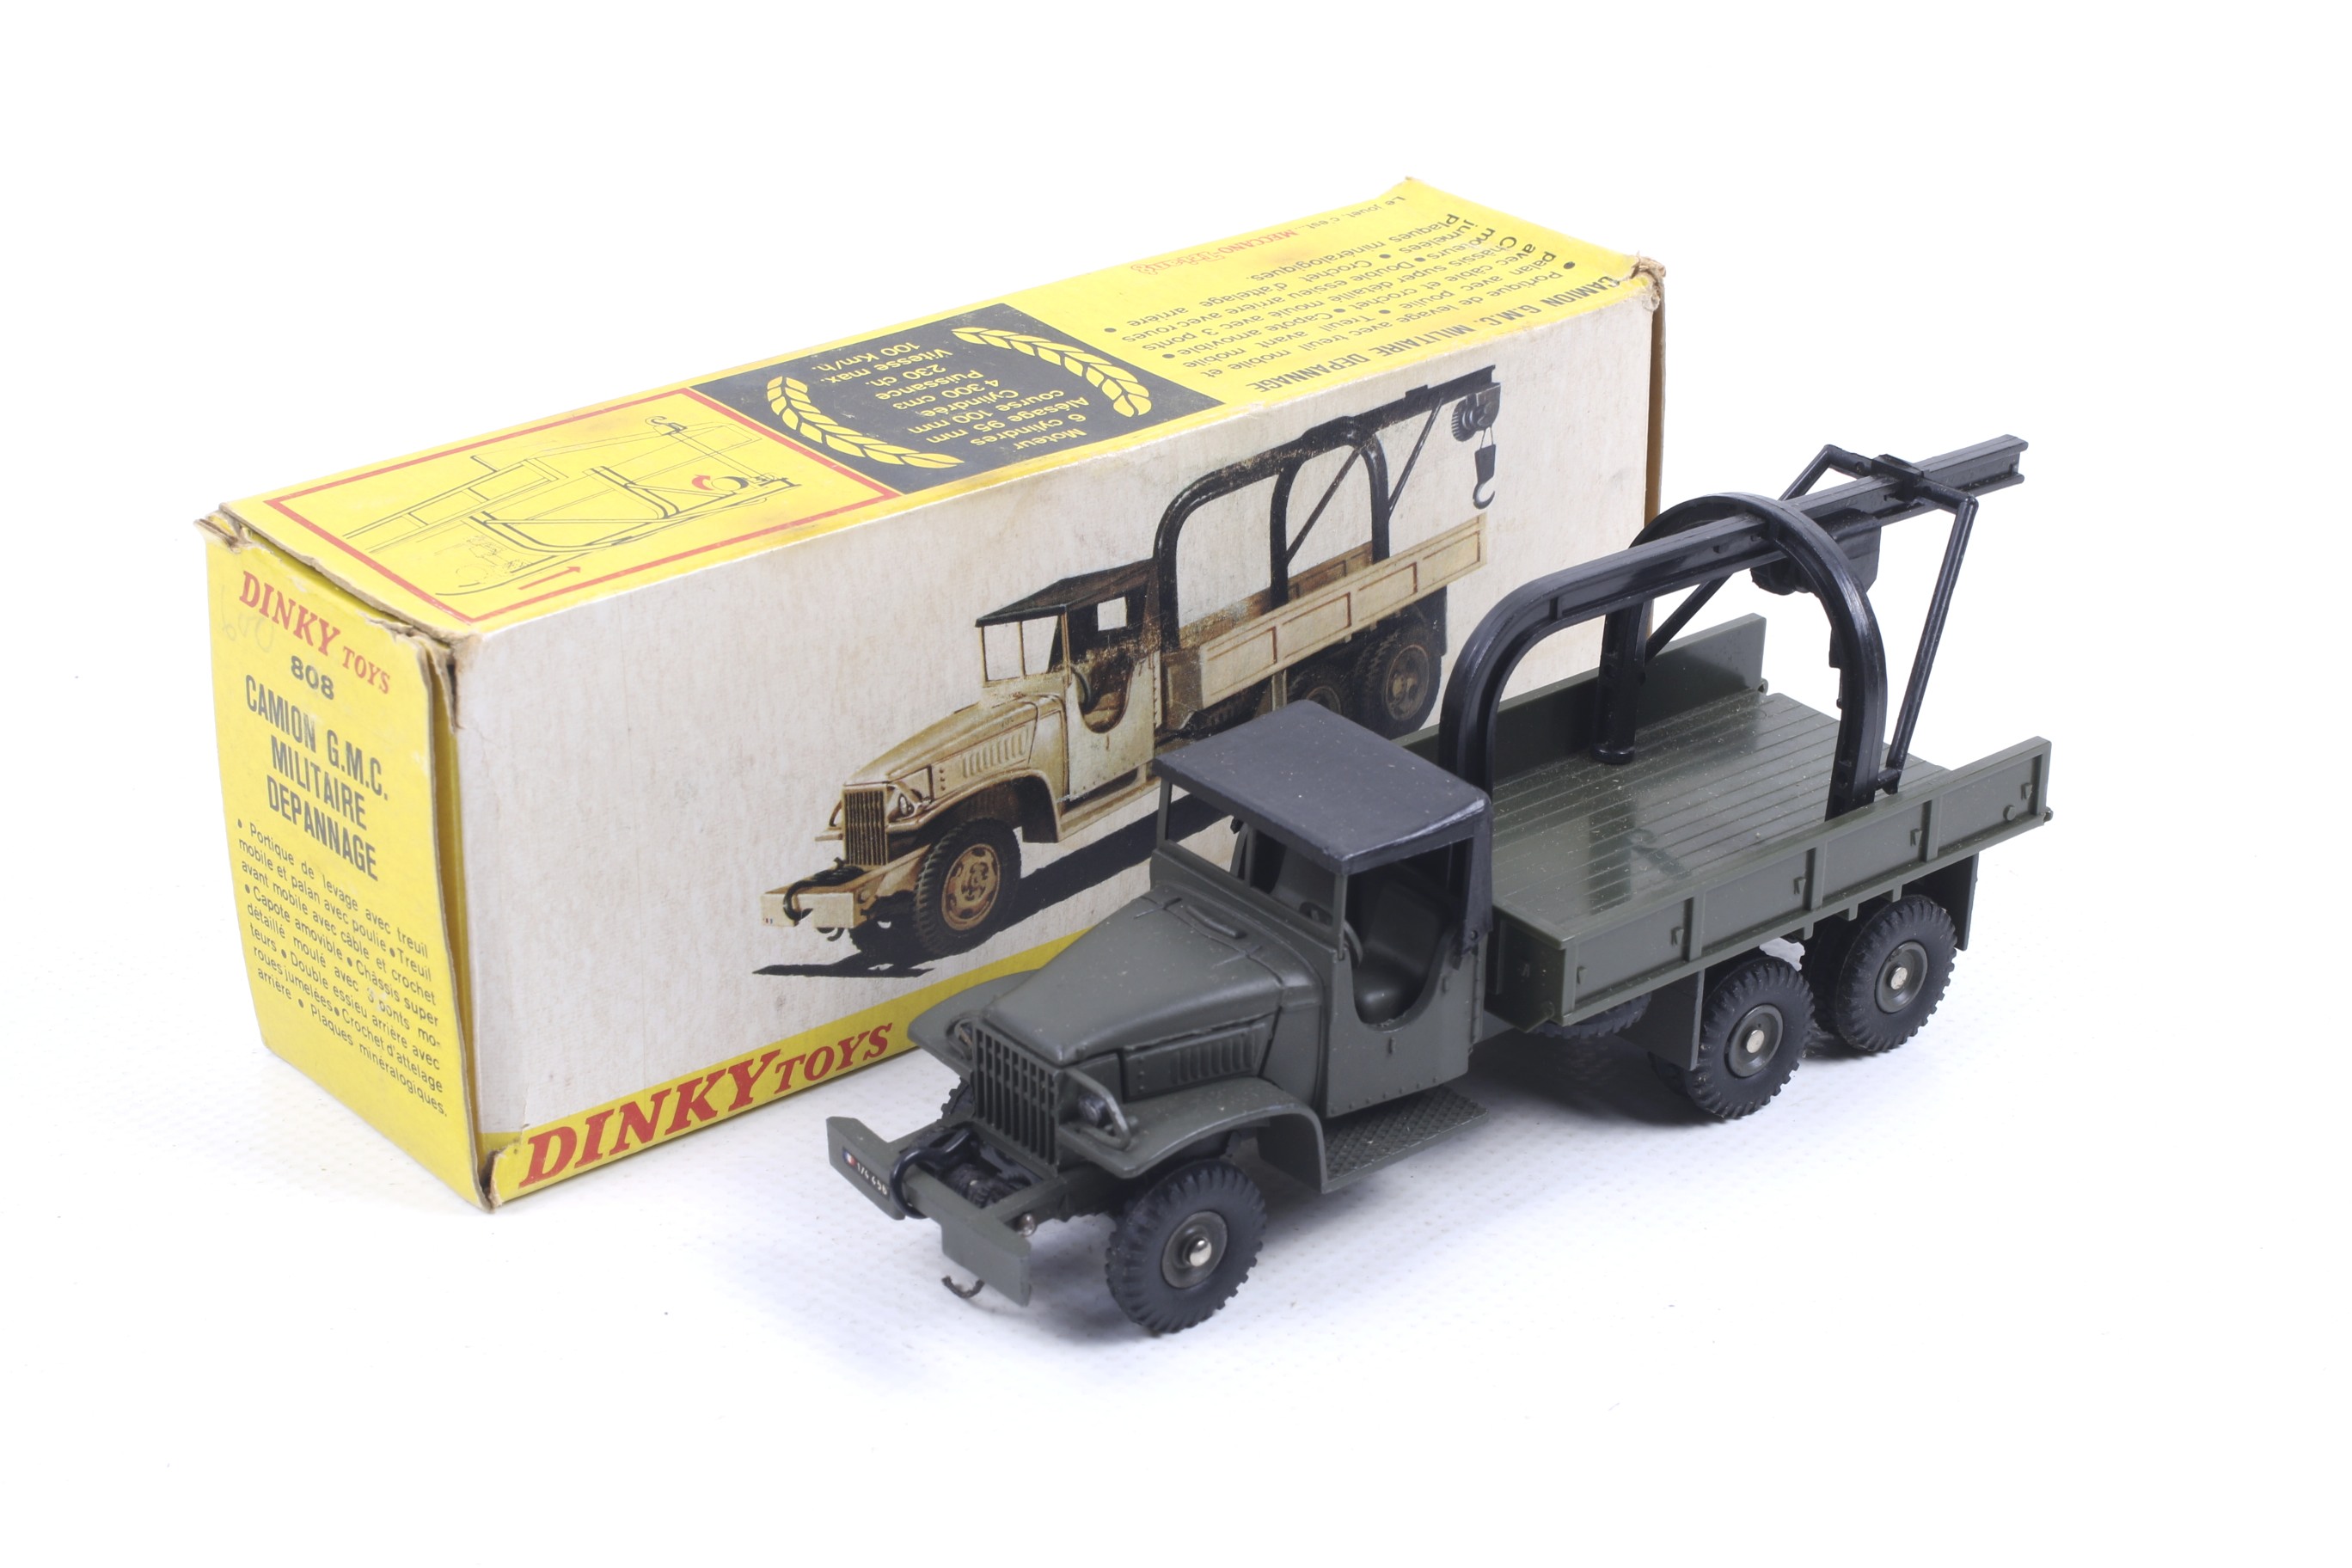 A French Dinky diecast Camion GMC Militaire depannage. No.